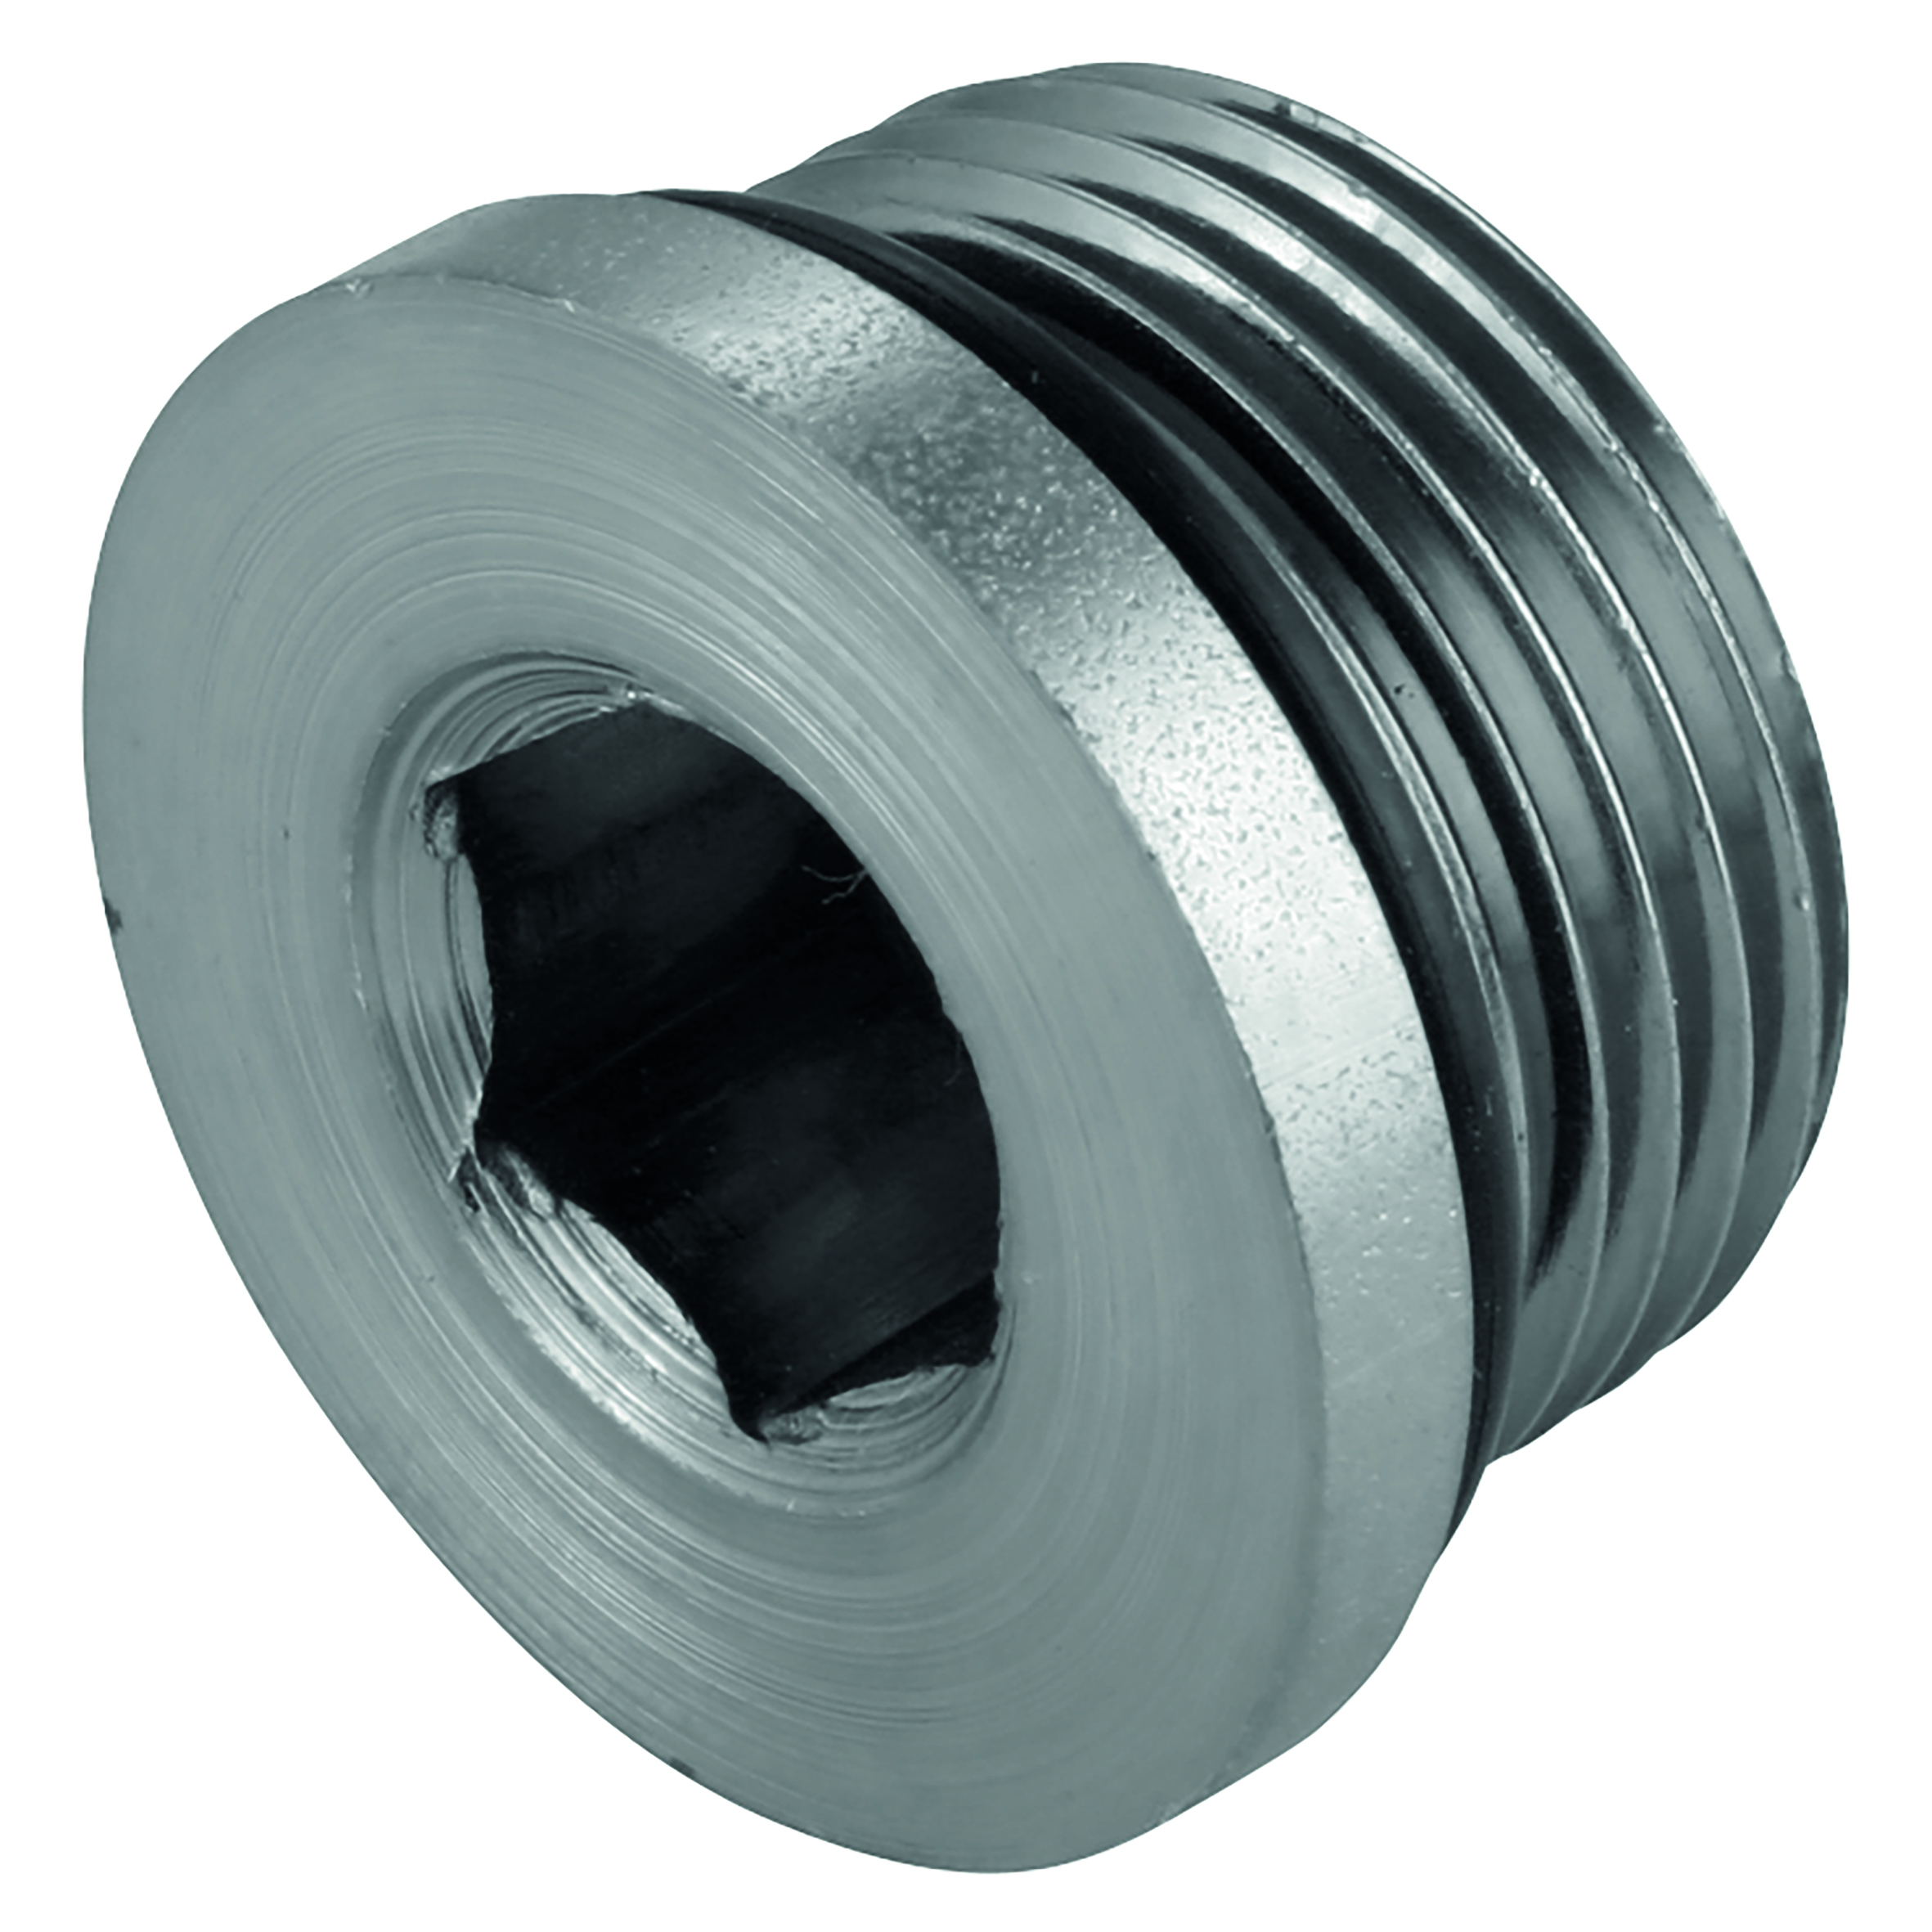 1.1/16" UNF HOLLOW HEX O-RING STEEL PLUG